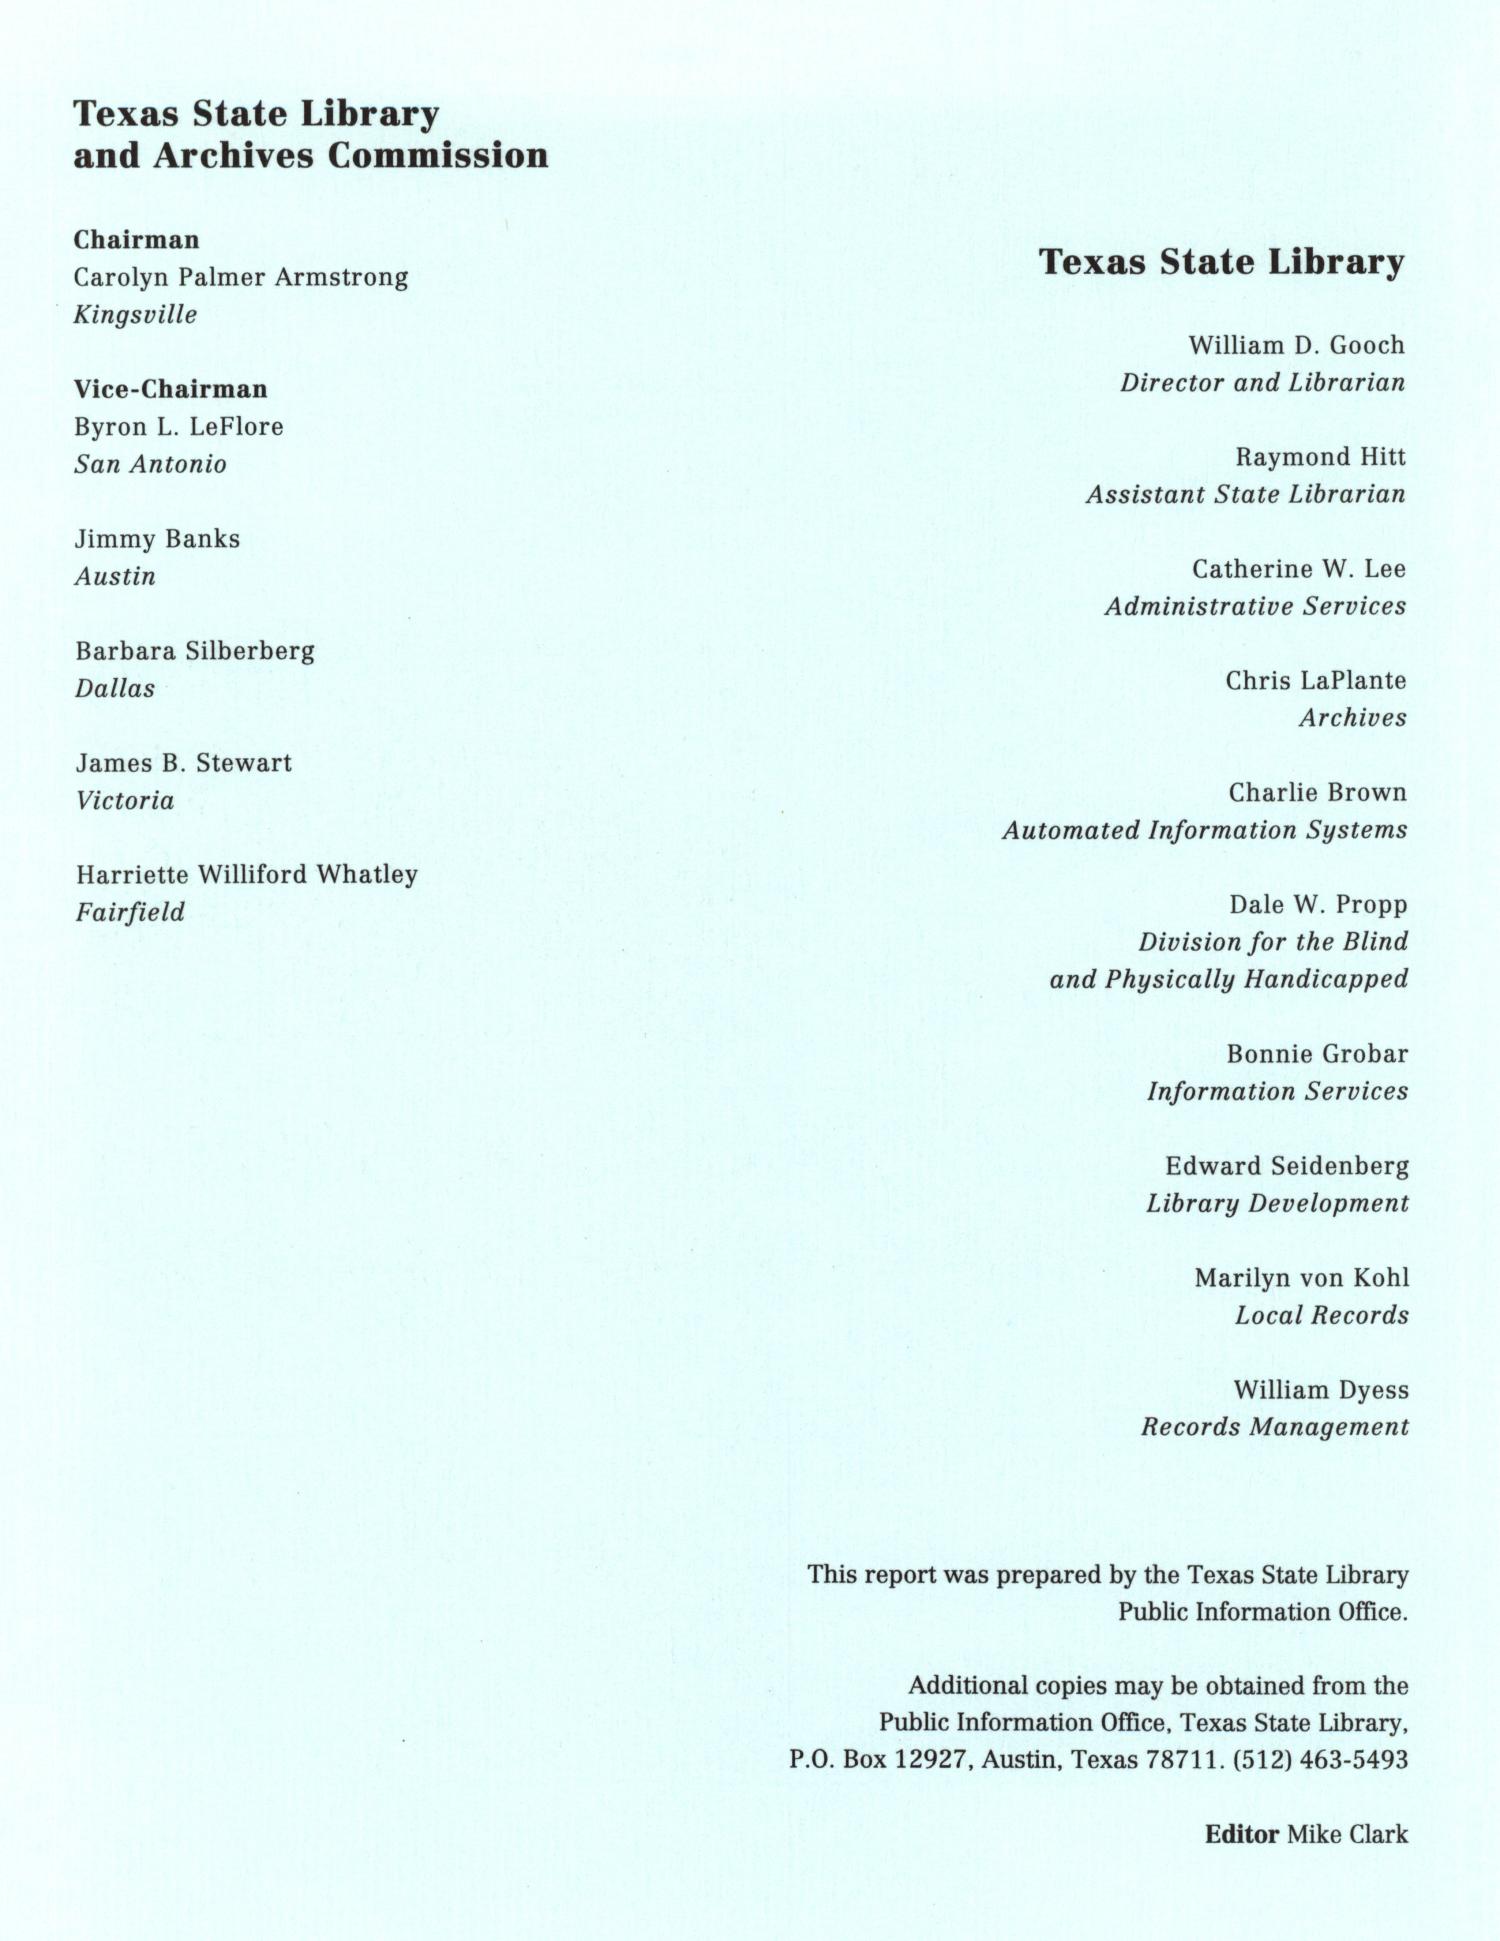 Biennial Report to the 73rd Texas Legislature: State Library and Archives Commission
                                                
                                                    Front Inside
                                                